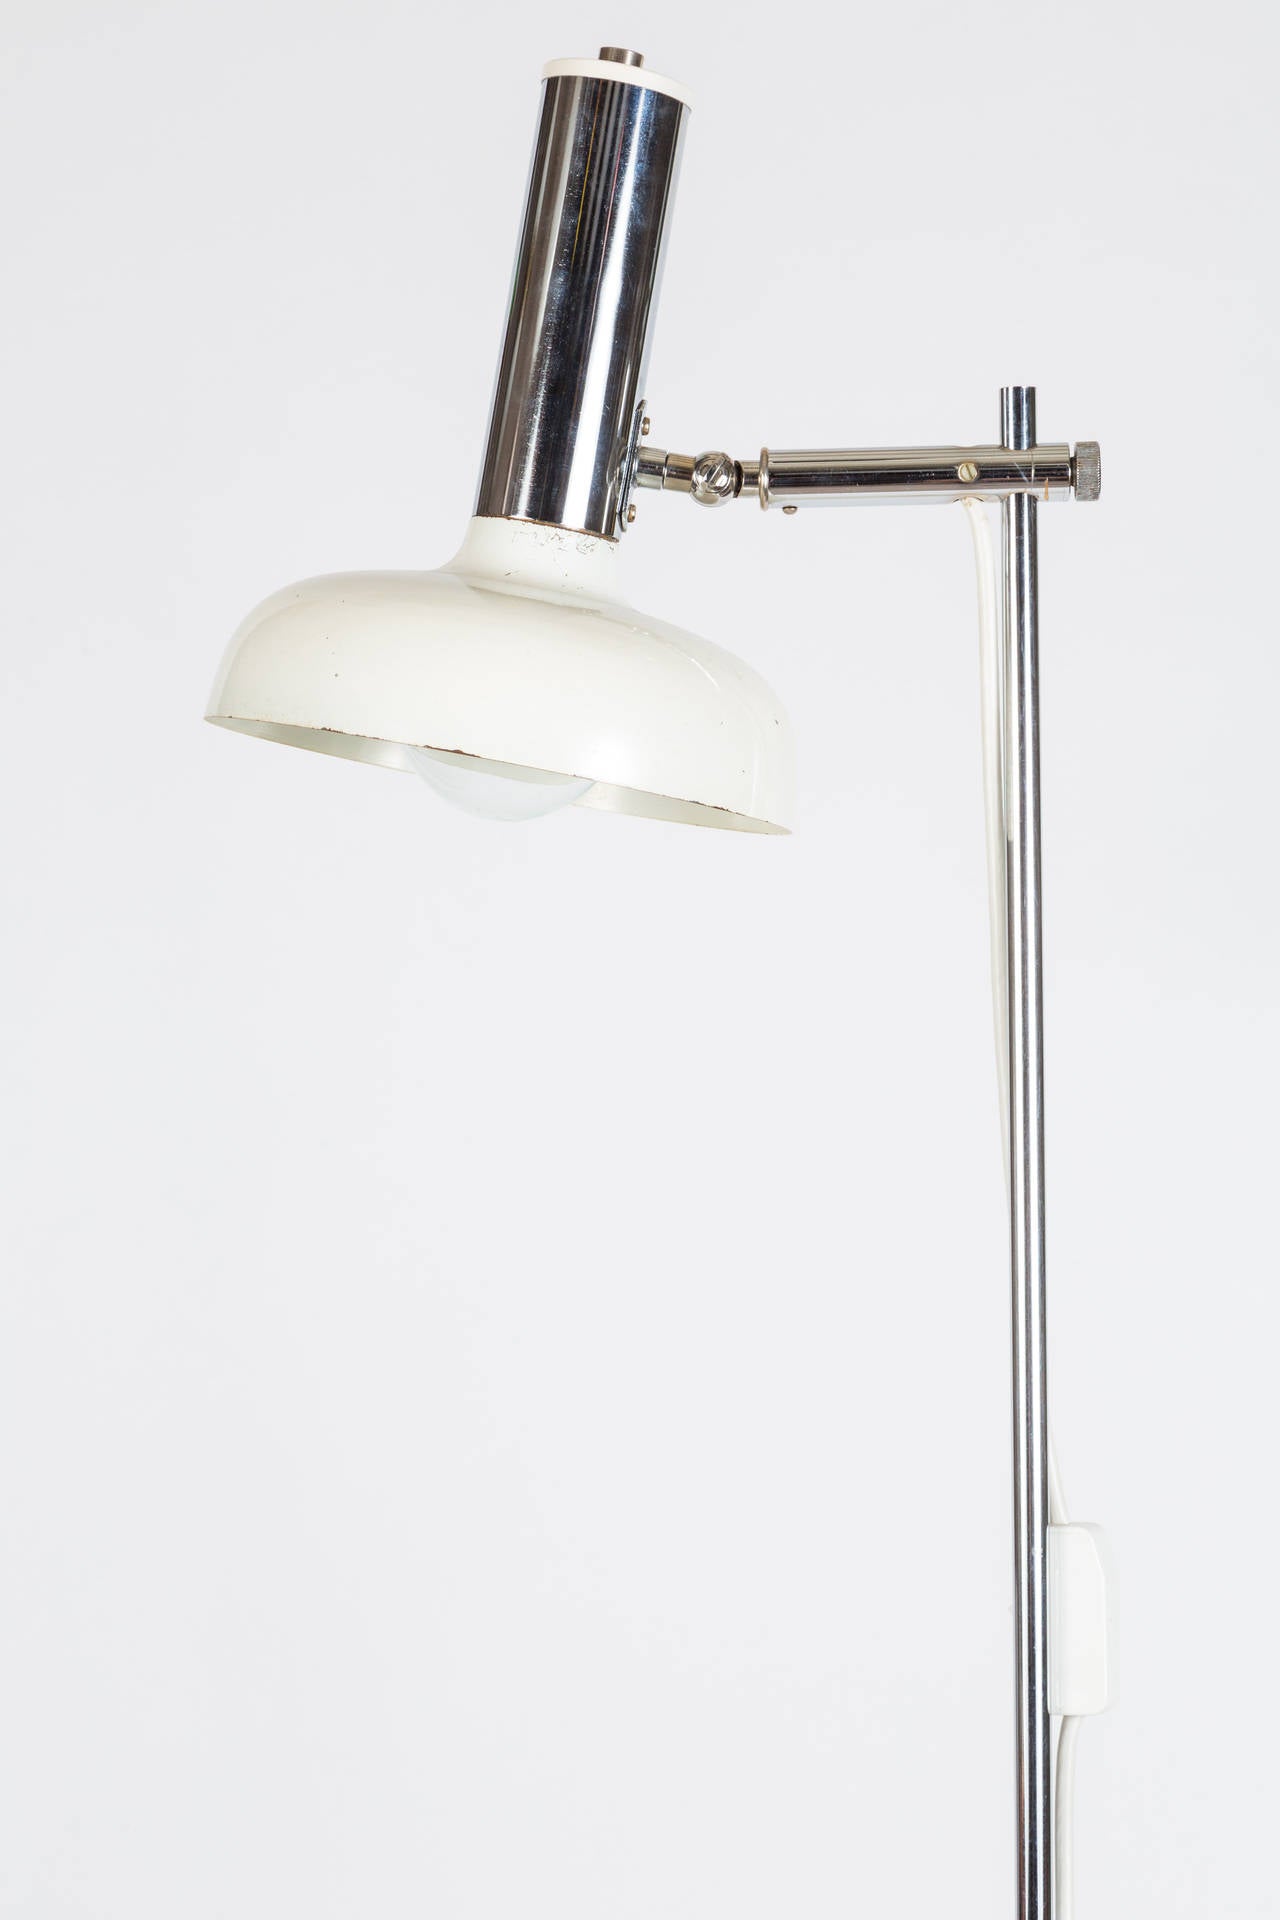 1960s Italian floor lamp in the style of Gino Sarfatti. The Italian designer behind this lamp is unknown, but was obviously inspired by the style, material and spirit of the great Sarfatti for Arteluce. Executed in white enameled metal and